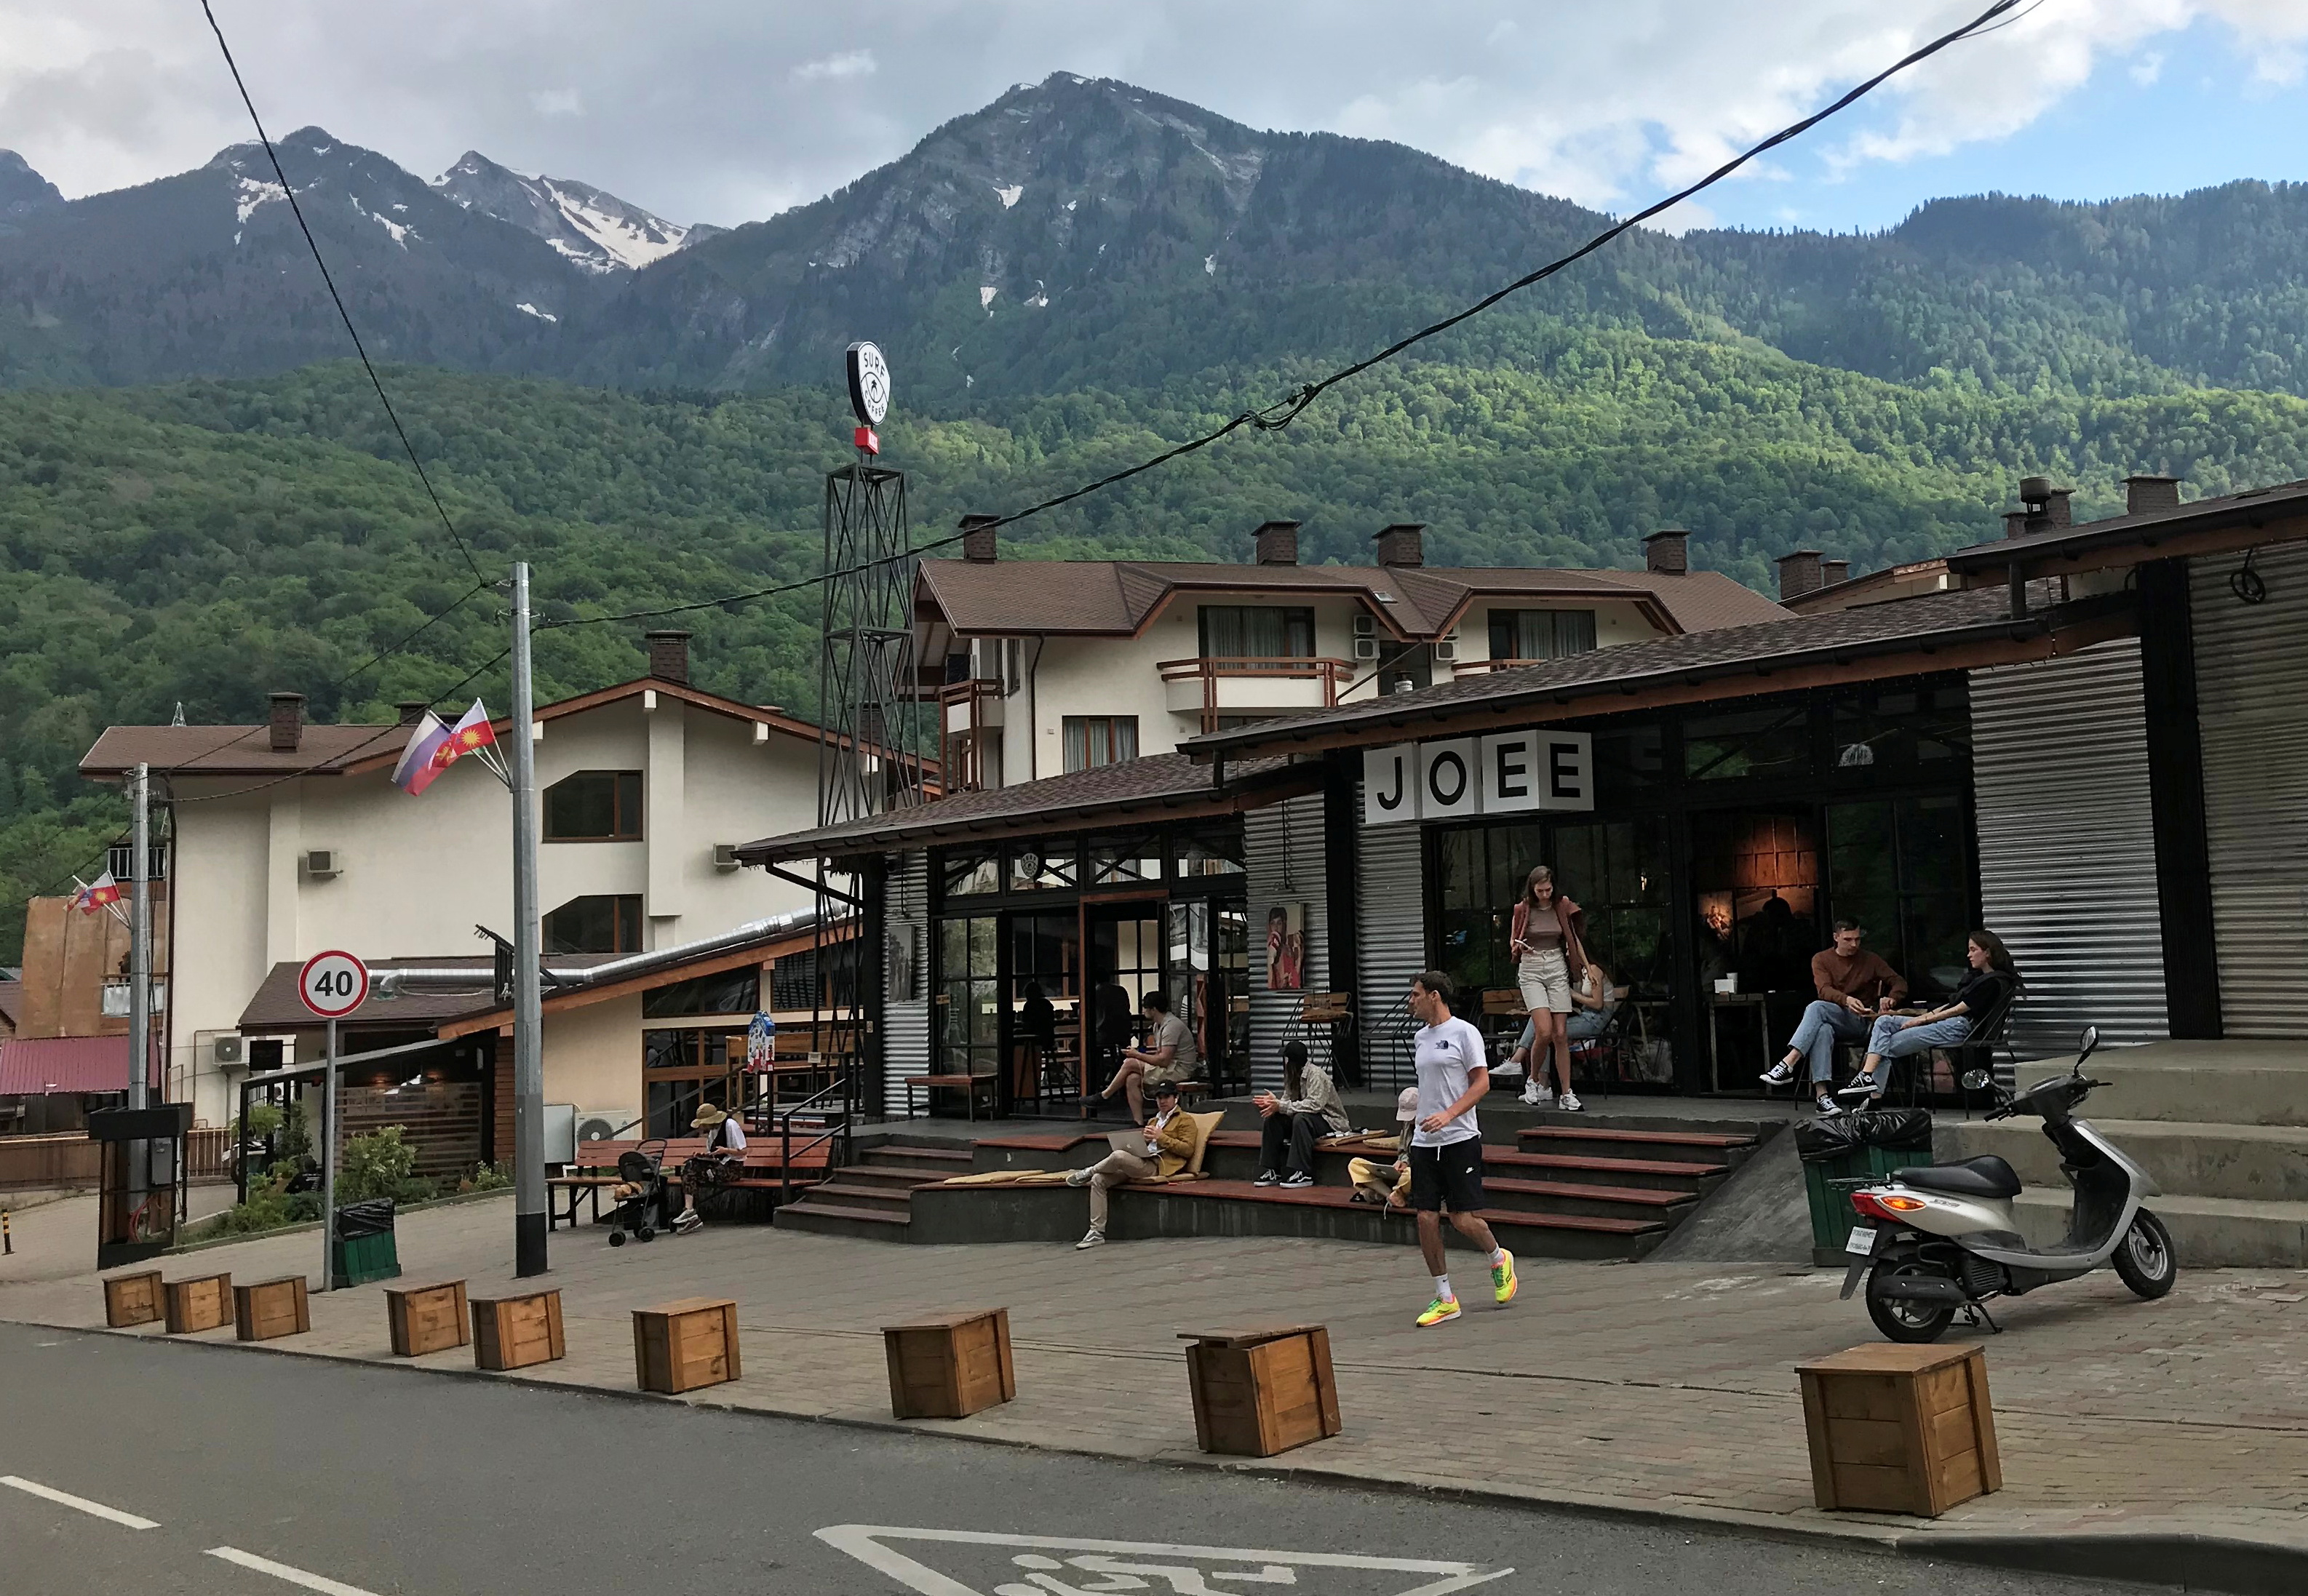 People are seen at a cafe in the village of Krasnaya Polyana